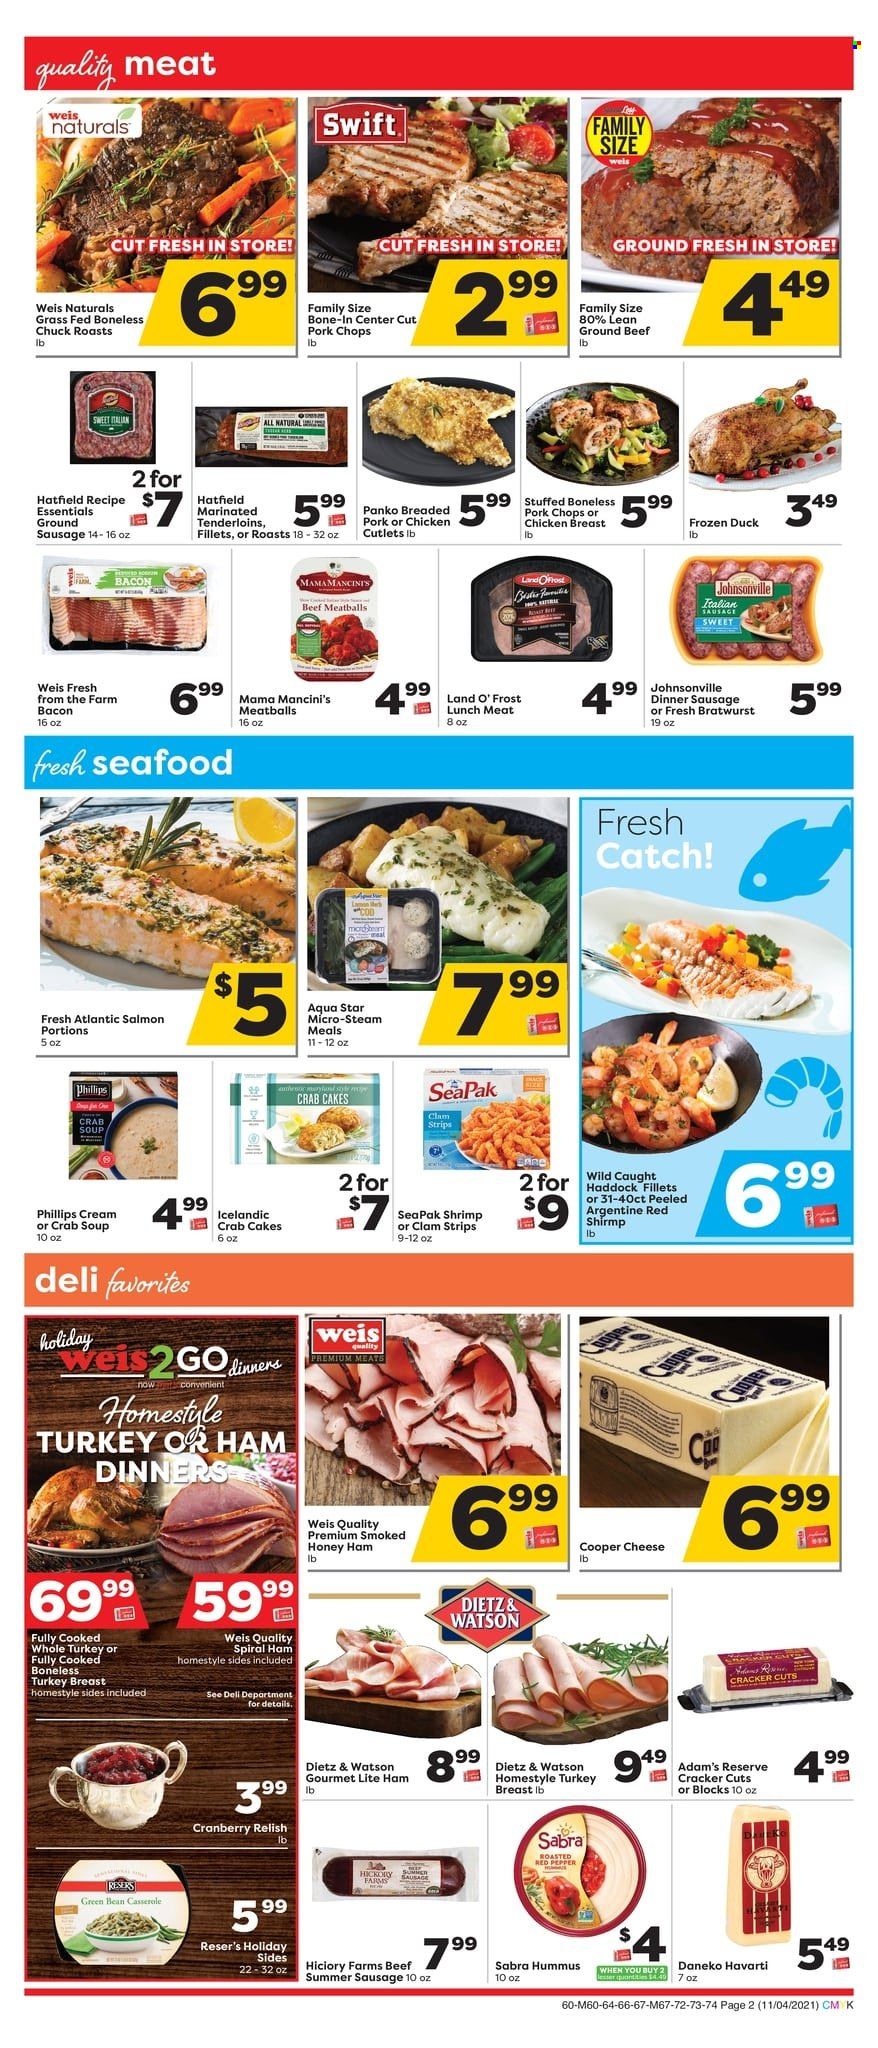 thumbnail - Weis Flyer - 11/04/2021 - 12/02/2021 - Sales products - panko breadcrumbs, turkey breast, whole turkey, chicken cutlets, whole duck, beef meat, ground beef, Johnsonville, pork chops, pork meat, clams, salmon, haddock, seafood, shrimps, crab cake, meatballs, soup, bacon, ham, spiral ham, Dietz & Watson, bratwurst, sausage, summer sausage, hummus, lunch meat, Havarti, cheese, strips, crackers, casserole, Philips. Page 2.